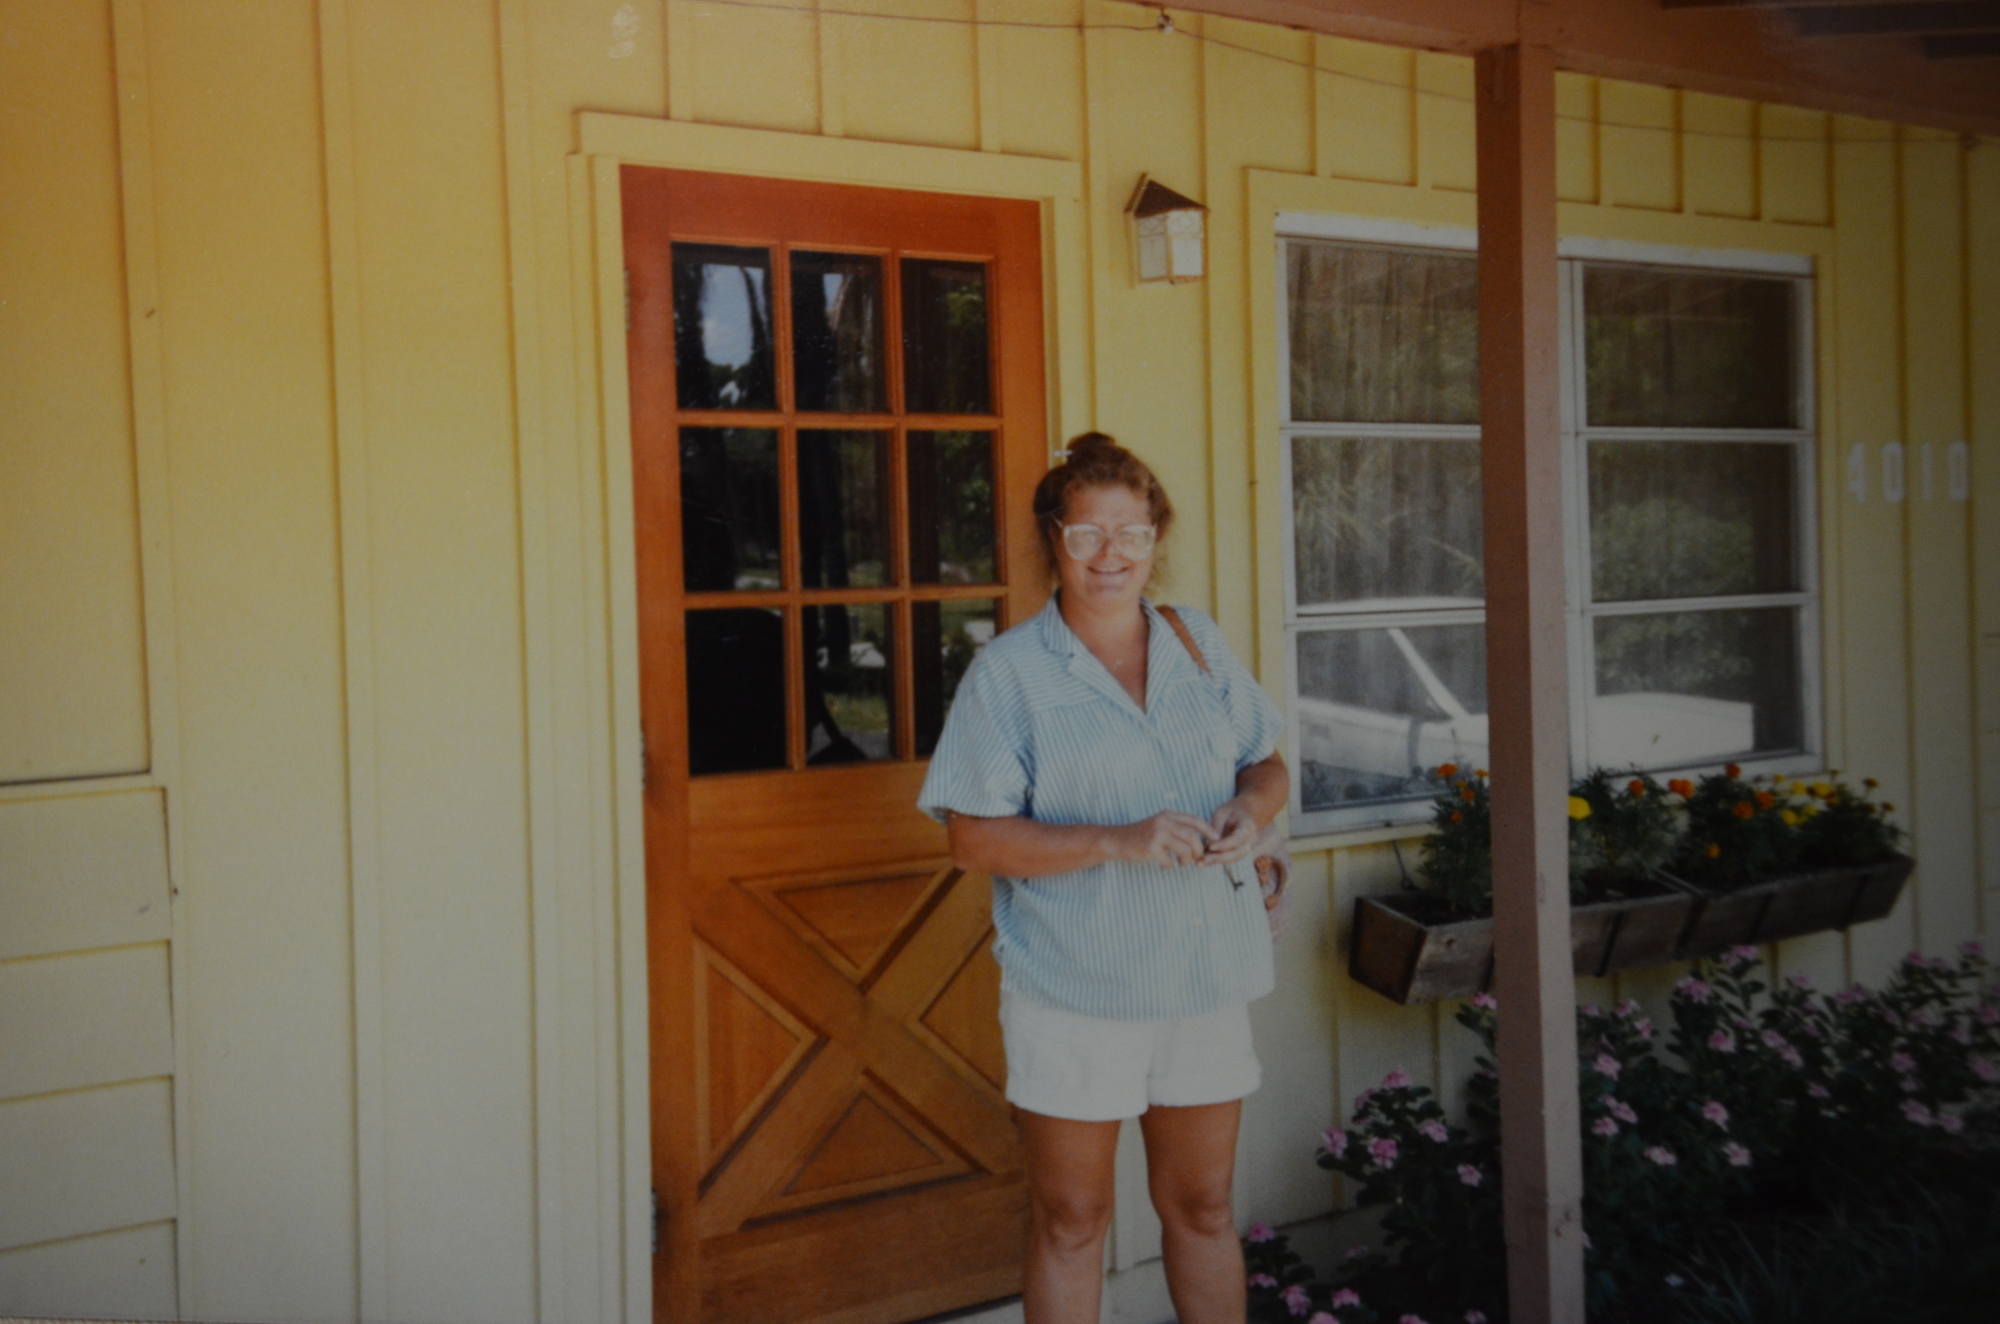 Courtesy photo. Janet Hember at the front door to Swiss Day Preschool a couple of years after she purchased the school.